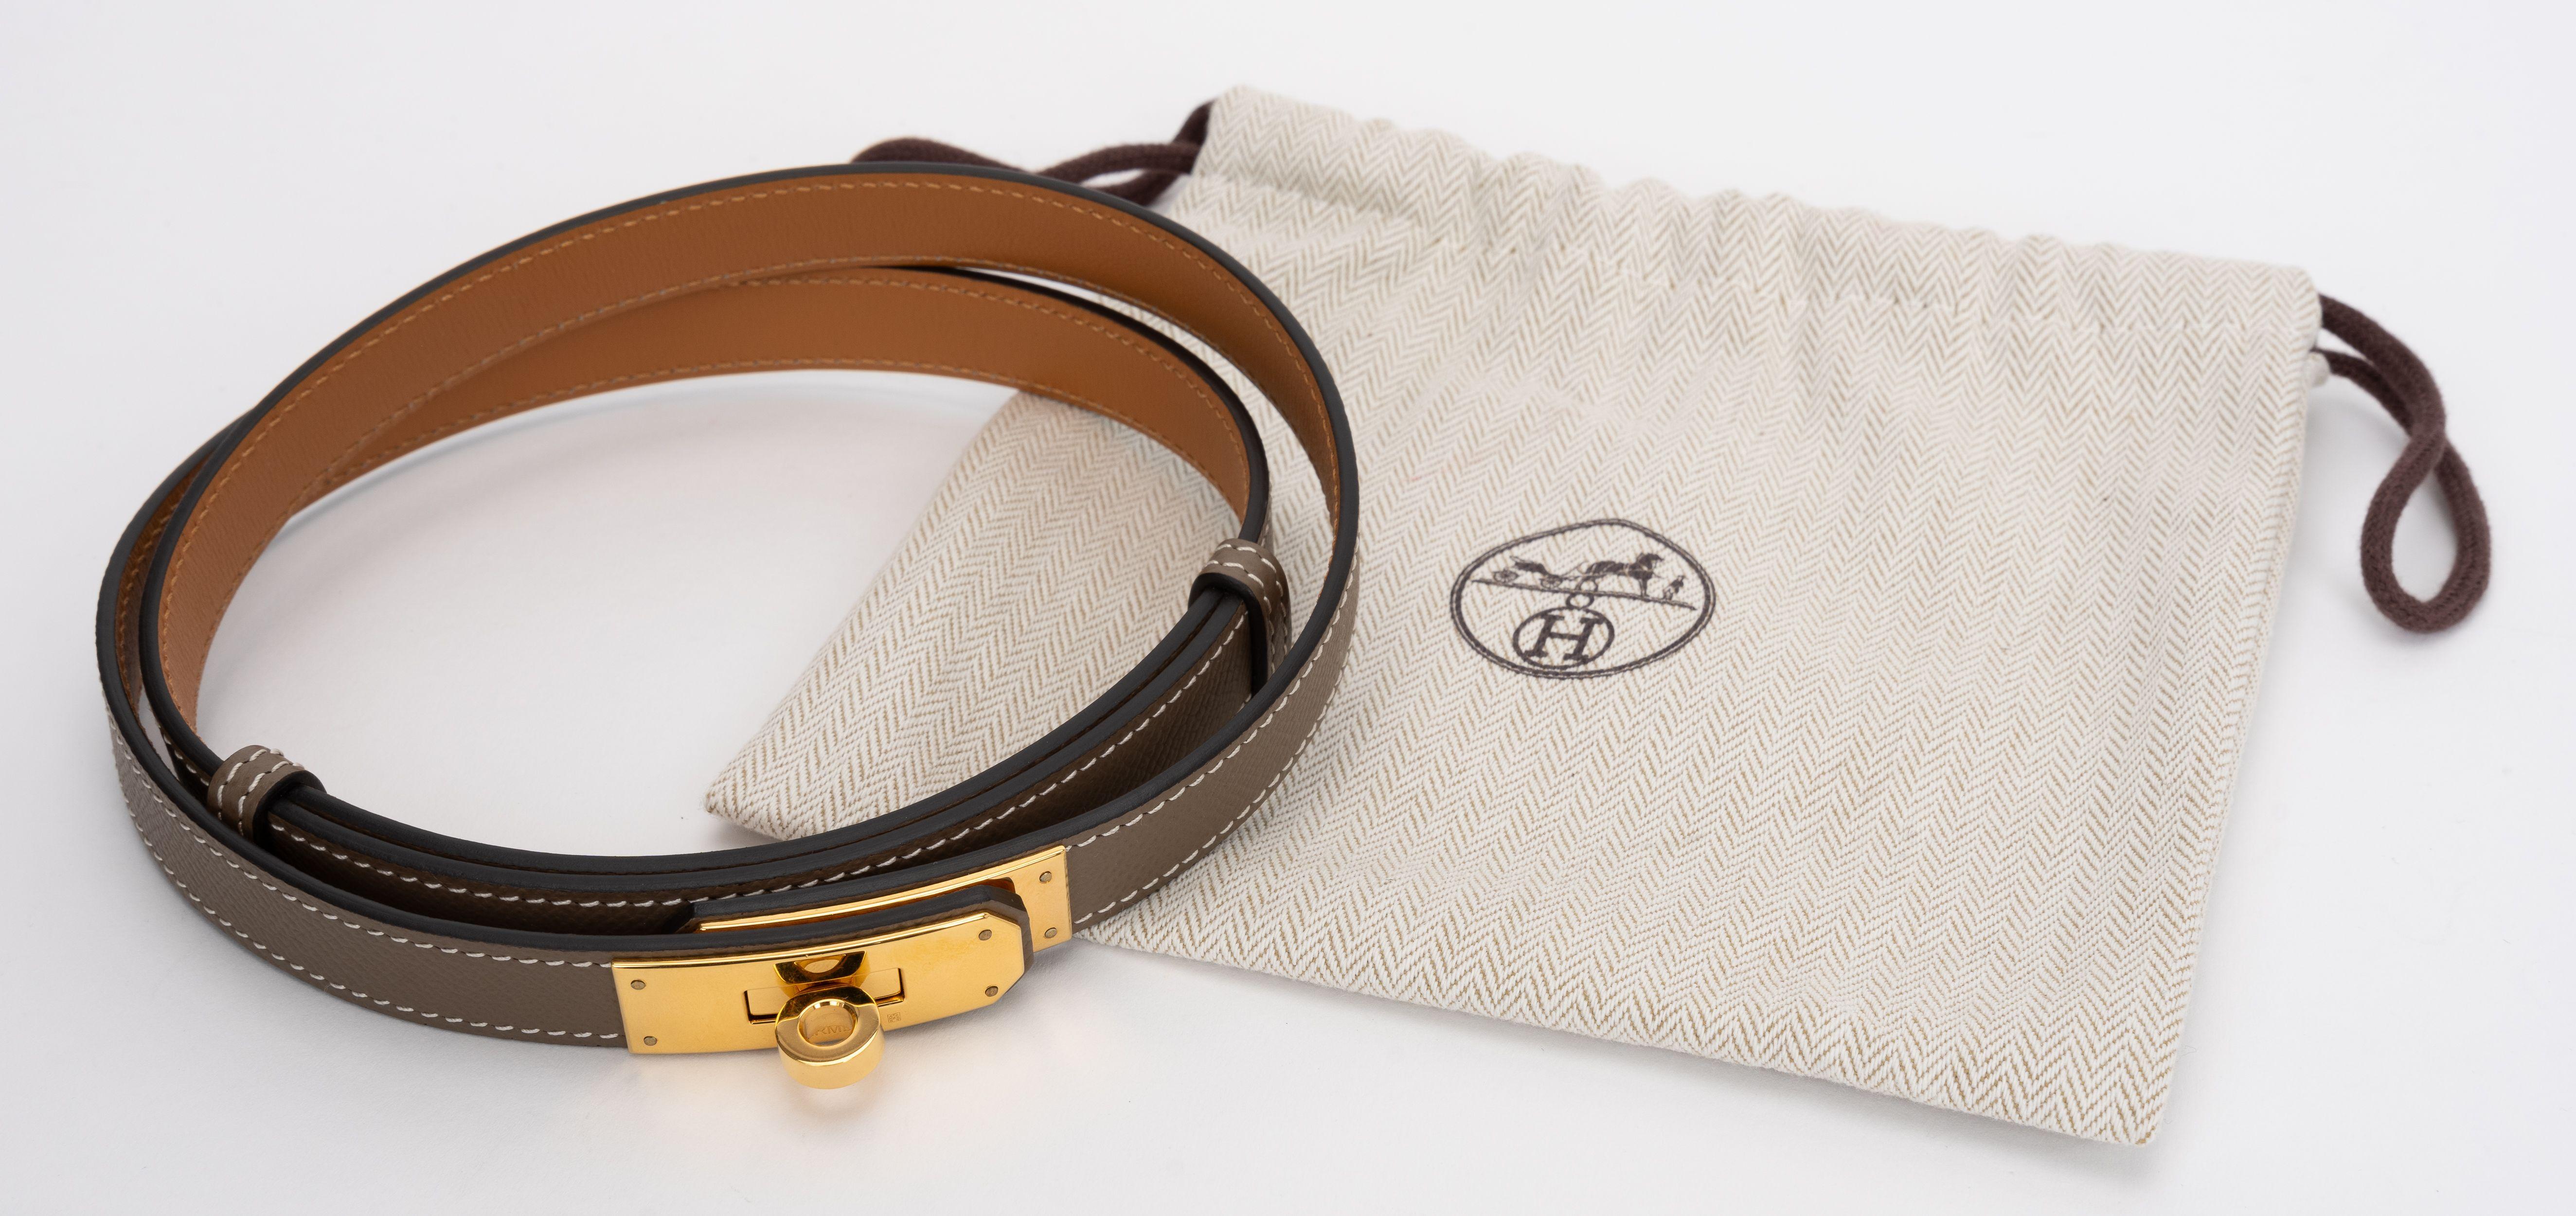 Hermes Epsom Kelly Belt features etoupe epsom leather with a gold Kelly turn lock on the front. The belt can be worn at the waist as well as, low at the waist. Width: .71